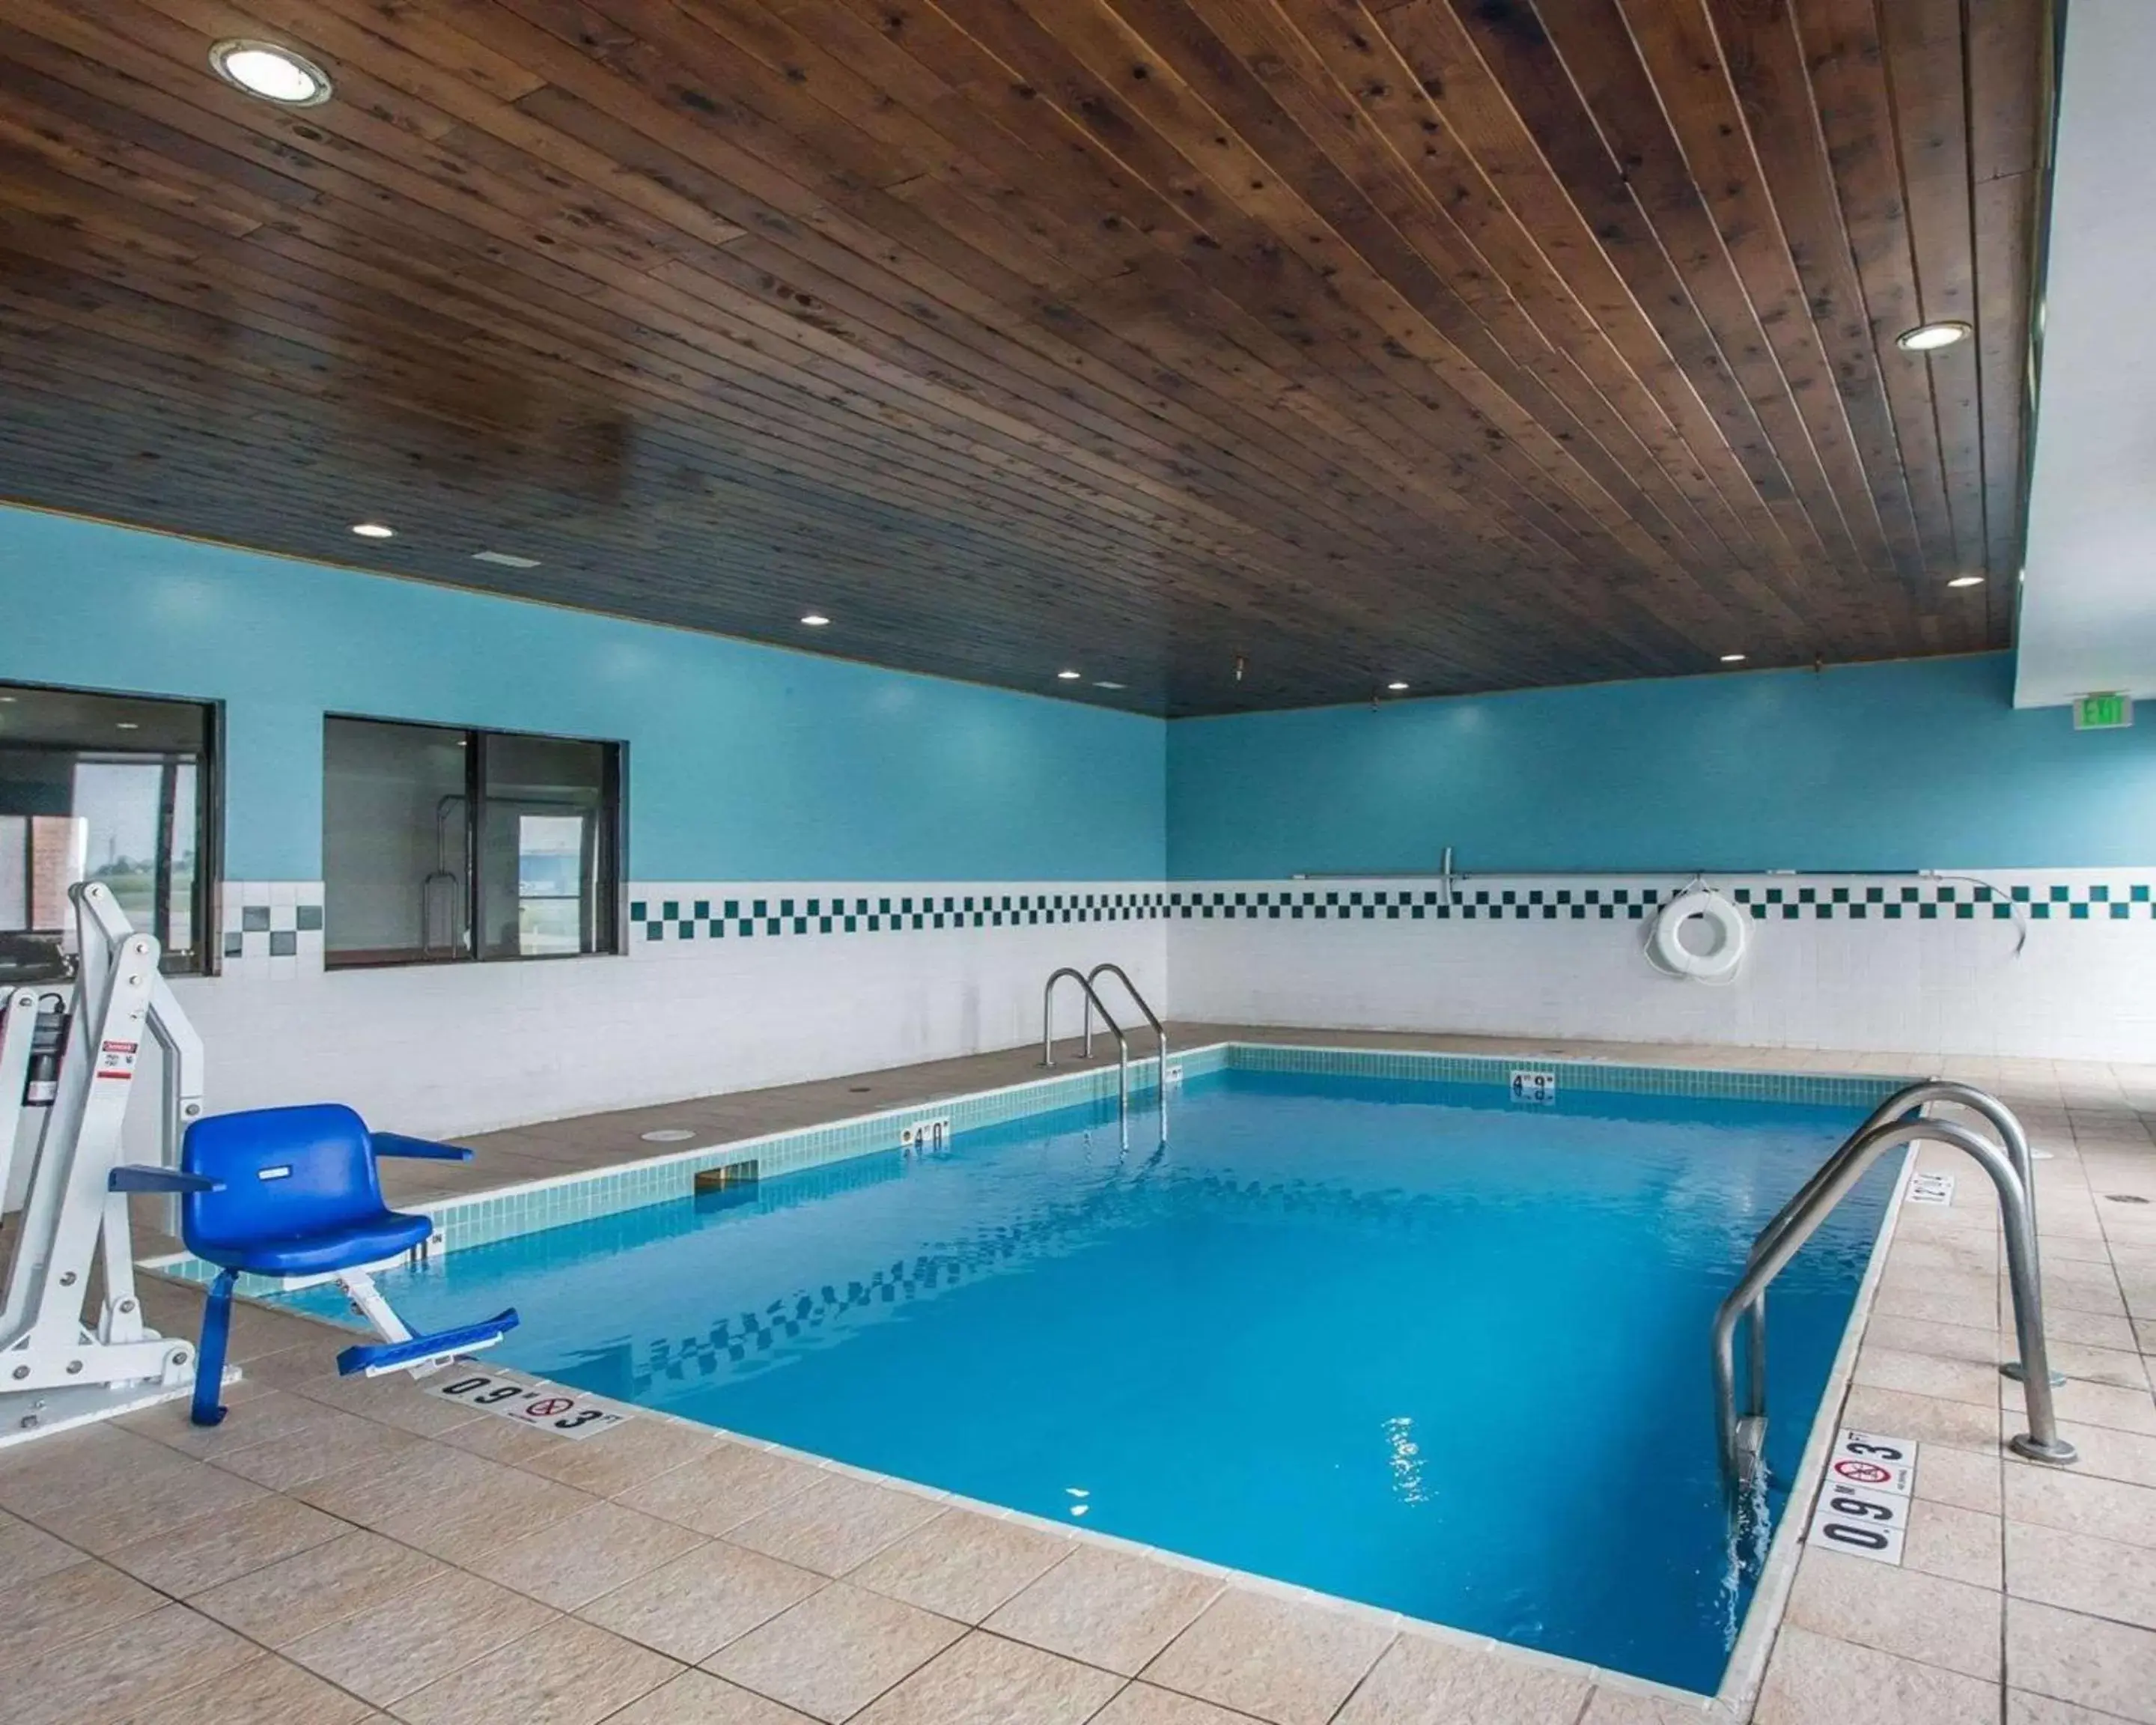 On site, Swimming Pool in Quality Inn Peru near Starved Rock State Park